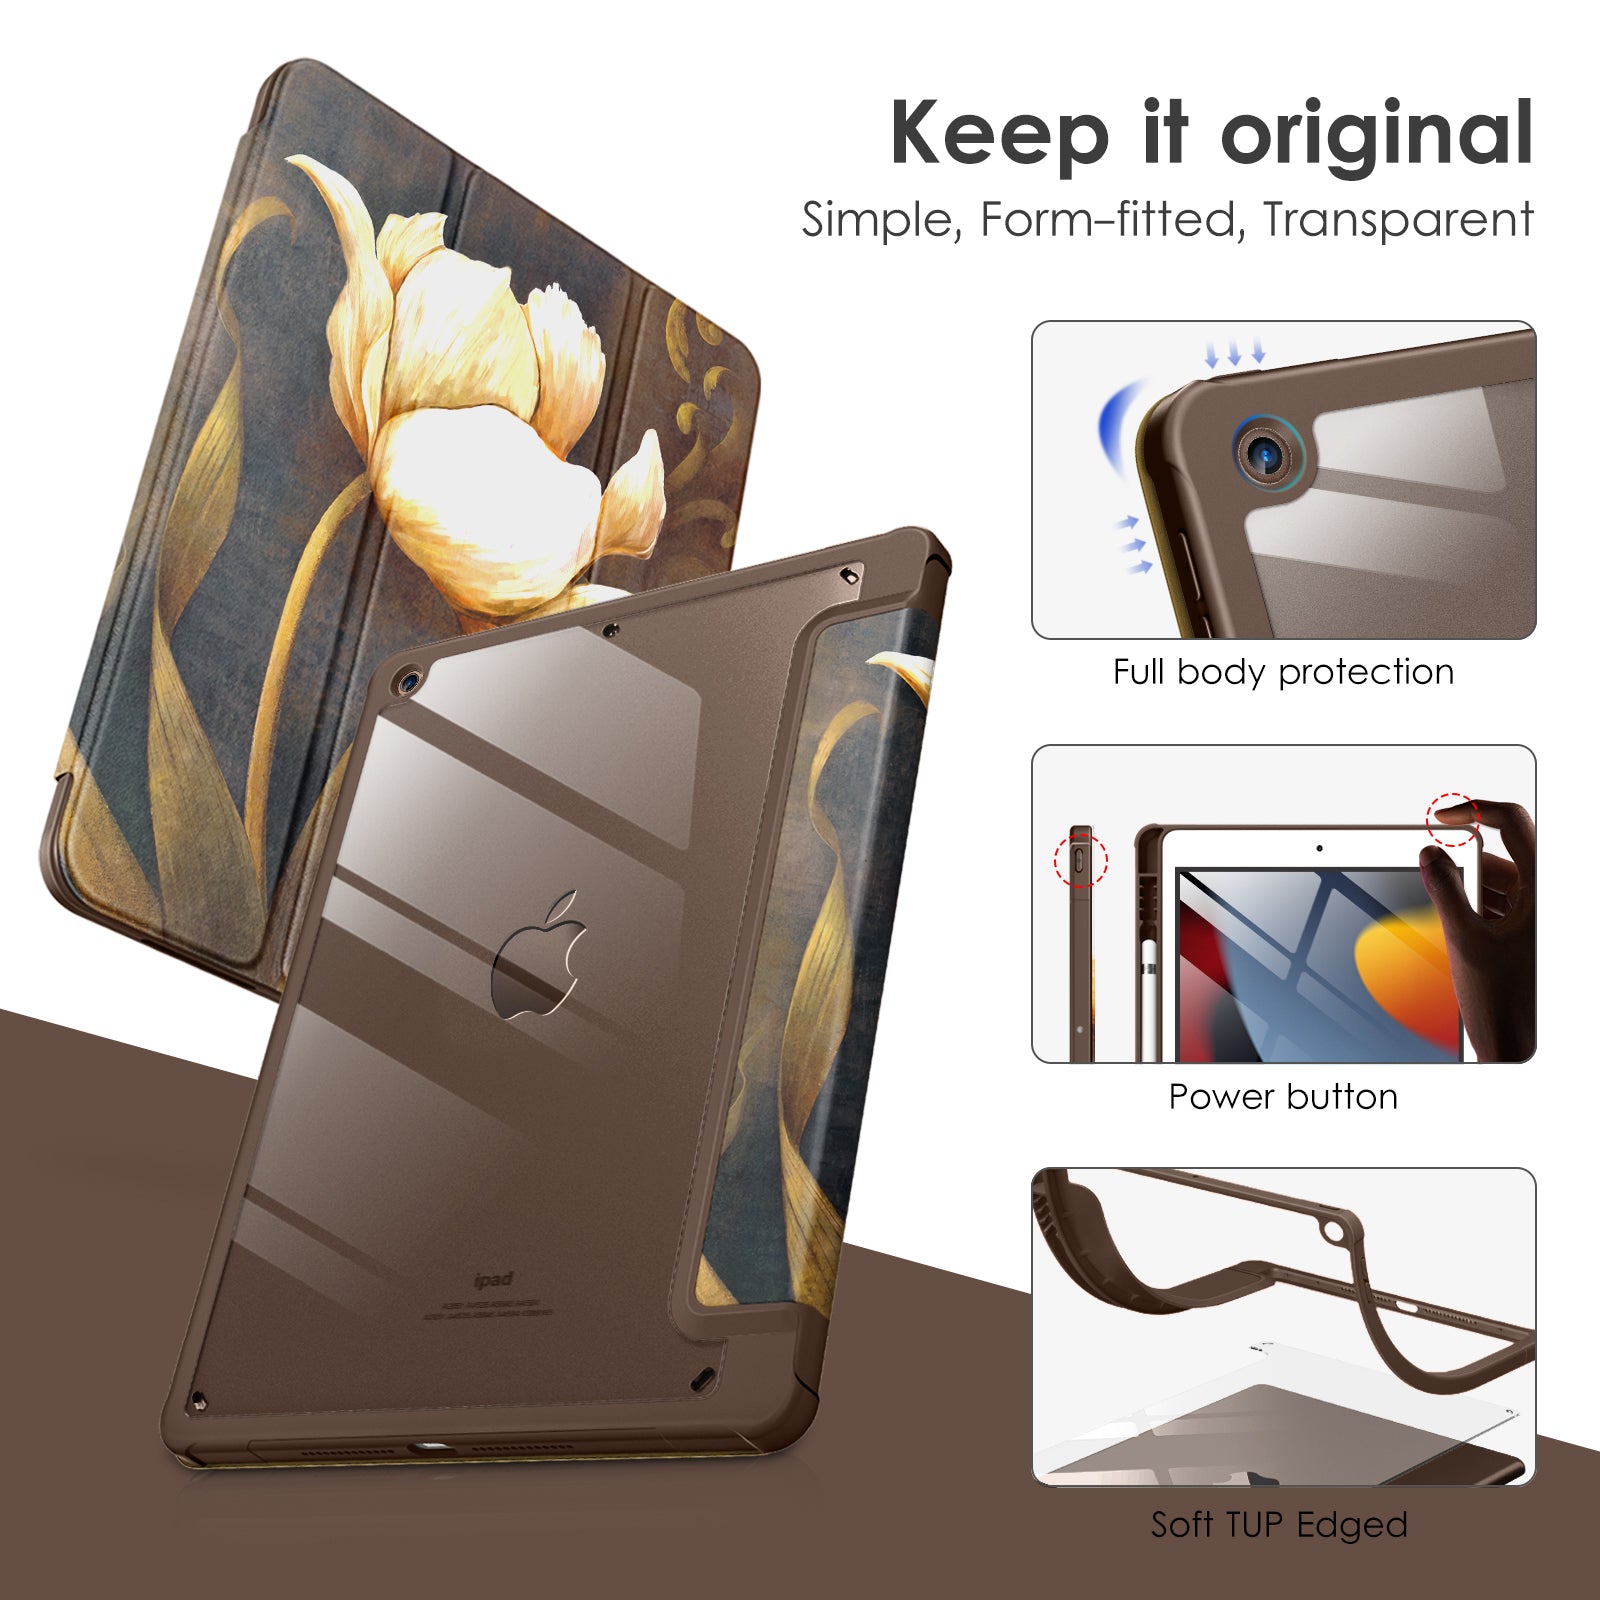 DTTOCASE Case for iPad 9th / 8th / 7th Generation 10.2 inch (2021/2020/2019 Released), Clear Back, TPU Shockproof Frame Cover[Built-in Pencil Holder,Support Auto Sleep/Wake] for ipad 10.2 - Black